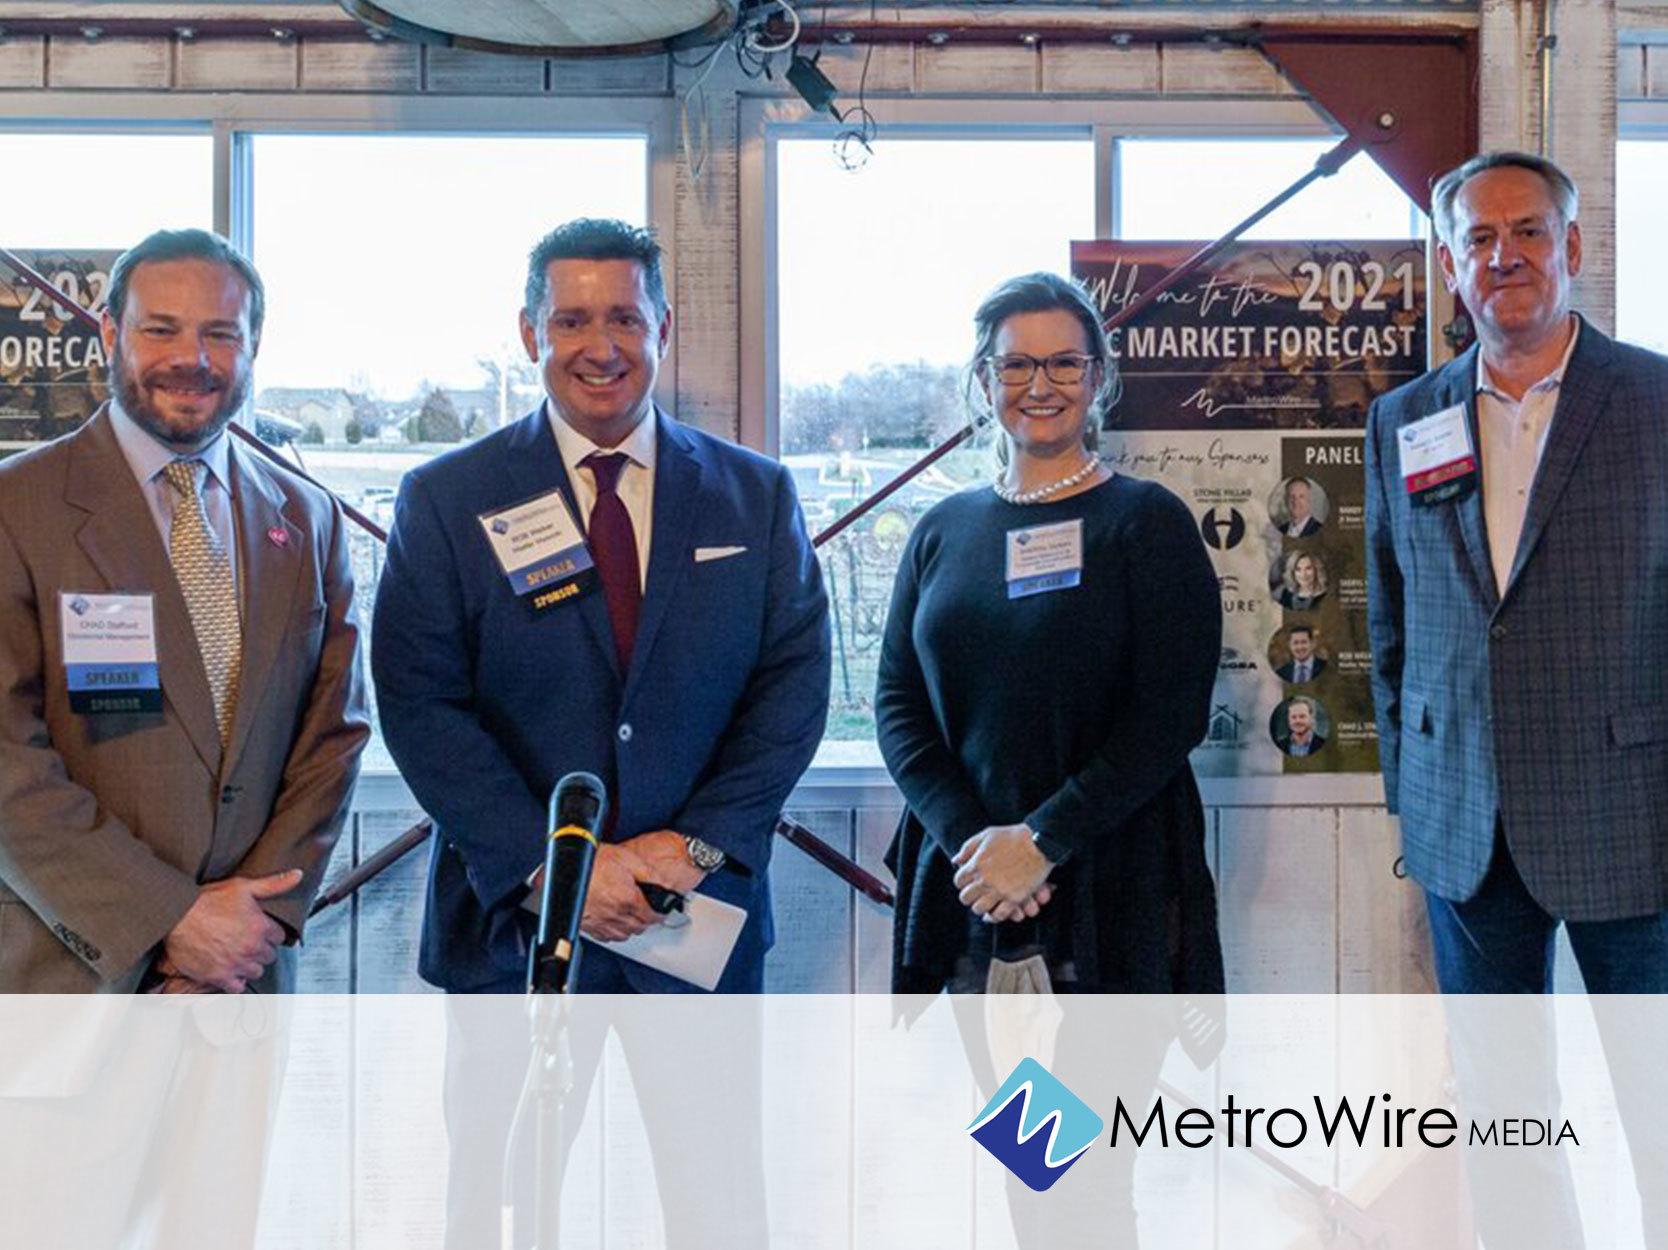 MWM panelists agree: 2020 inspired new opportunities, perspective